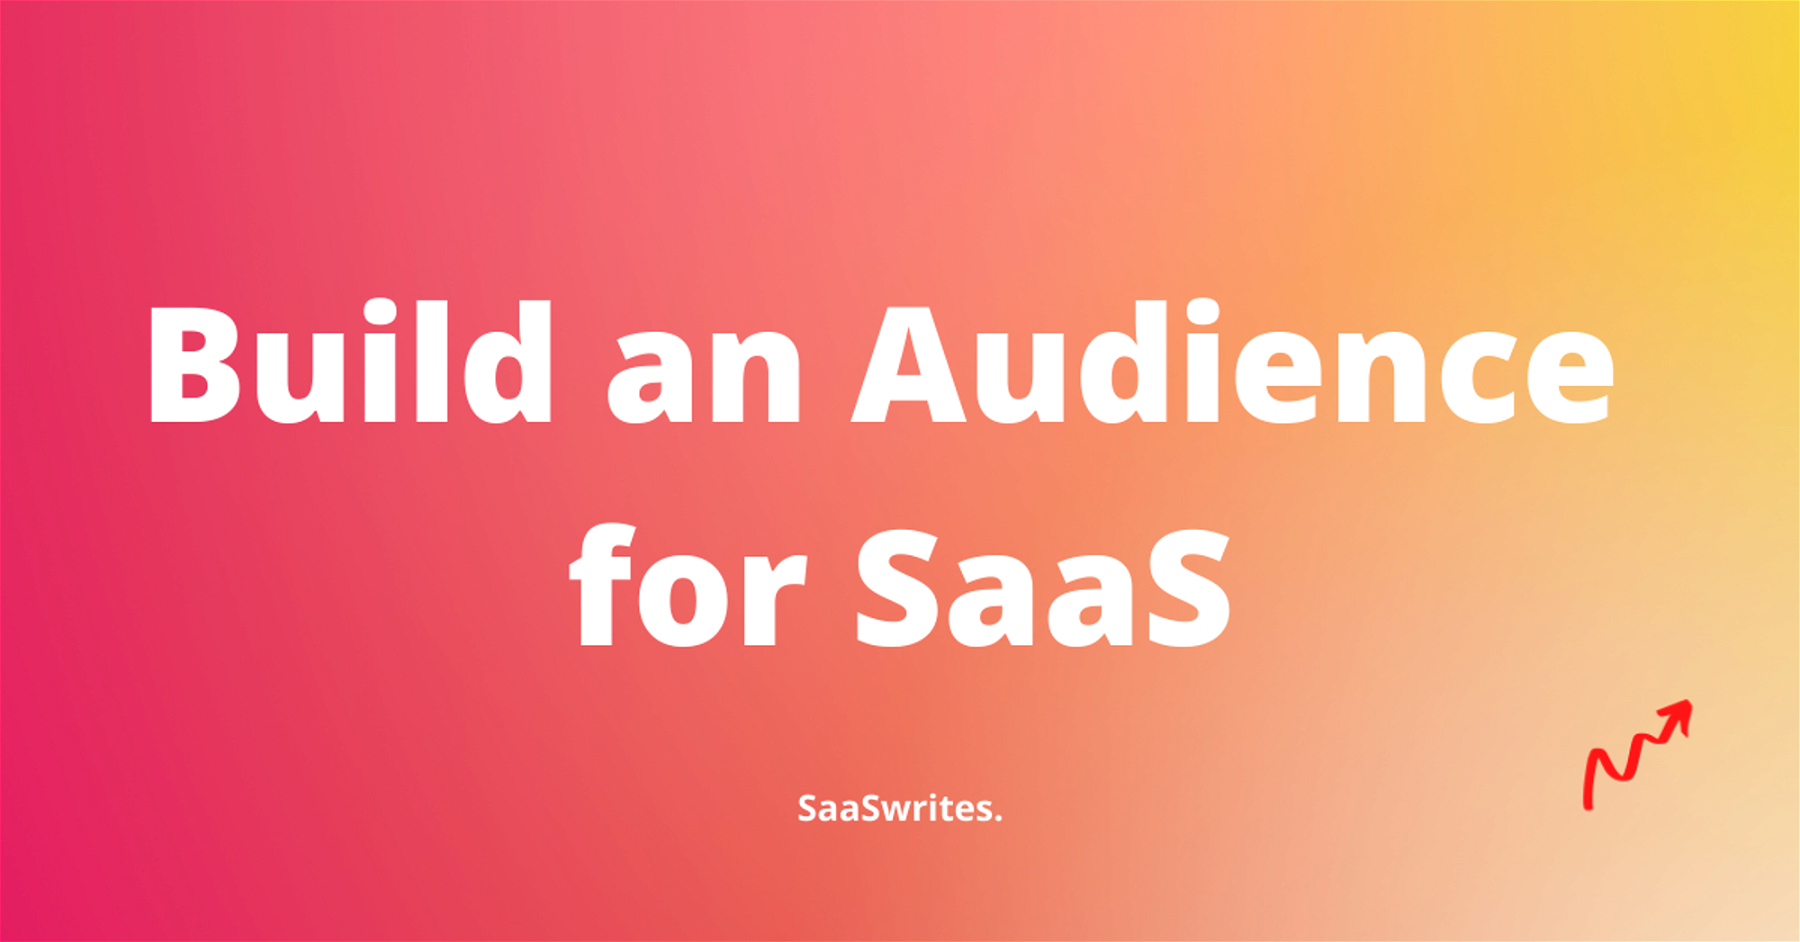 How does building an audience help your SaaS?